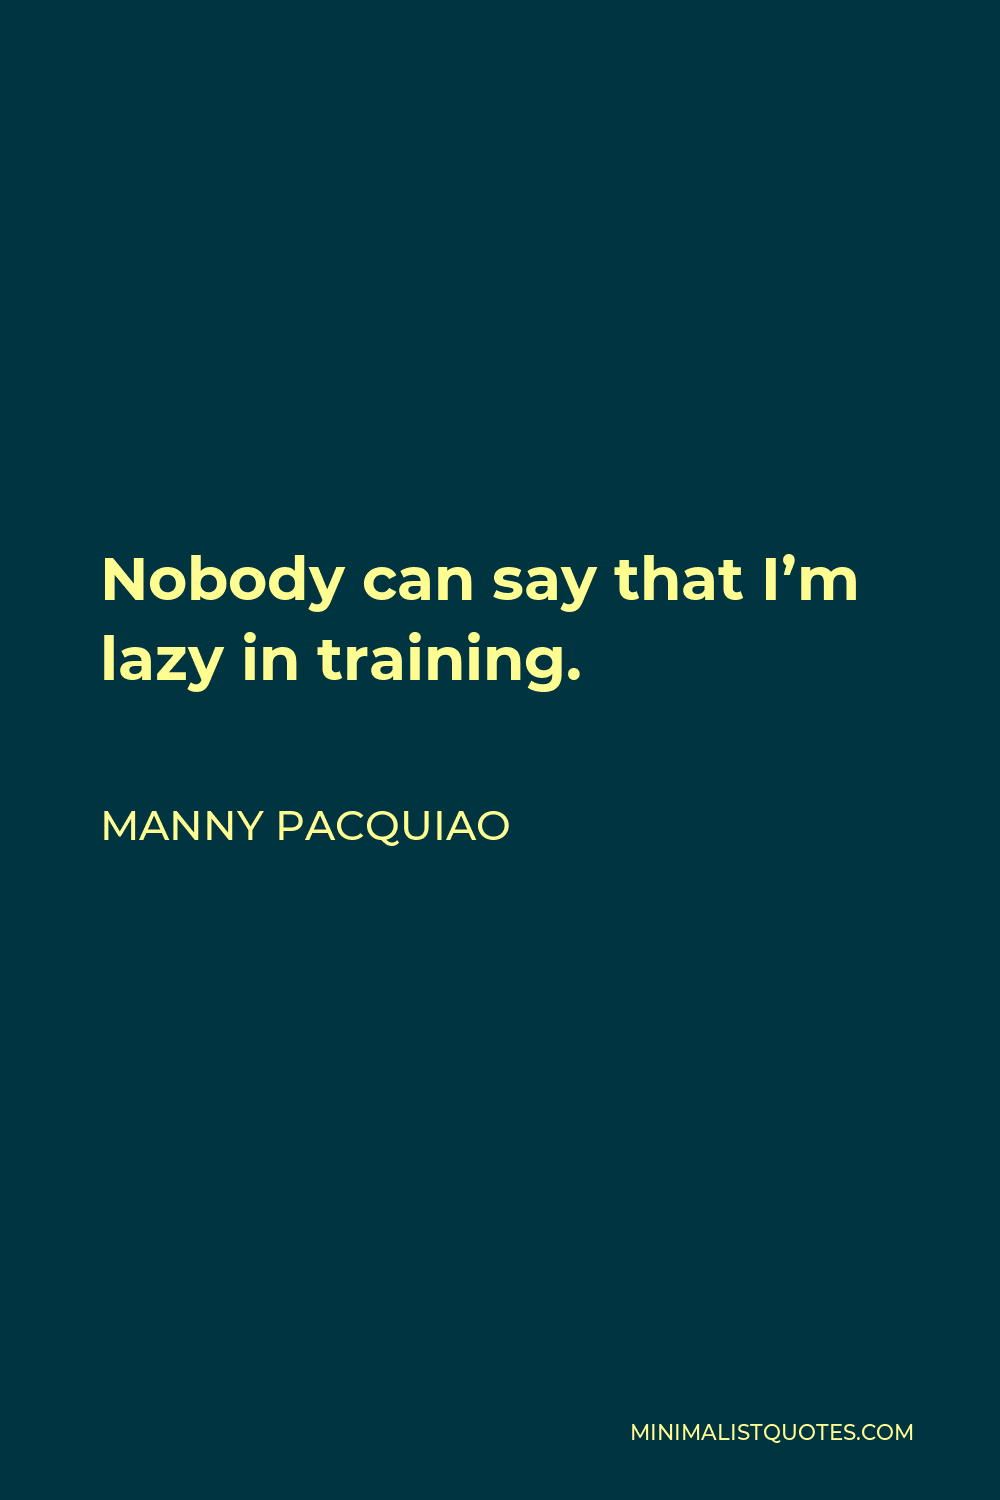 Manny Pacquiao Quote - Nobody can say that I’m lazy in training.